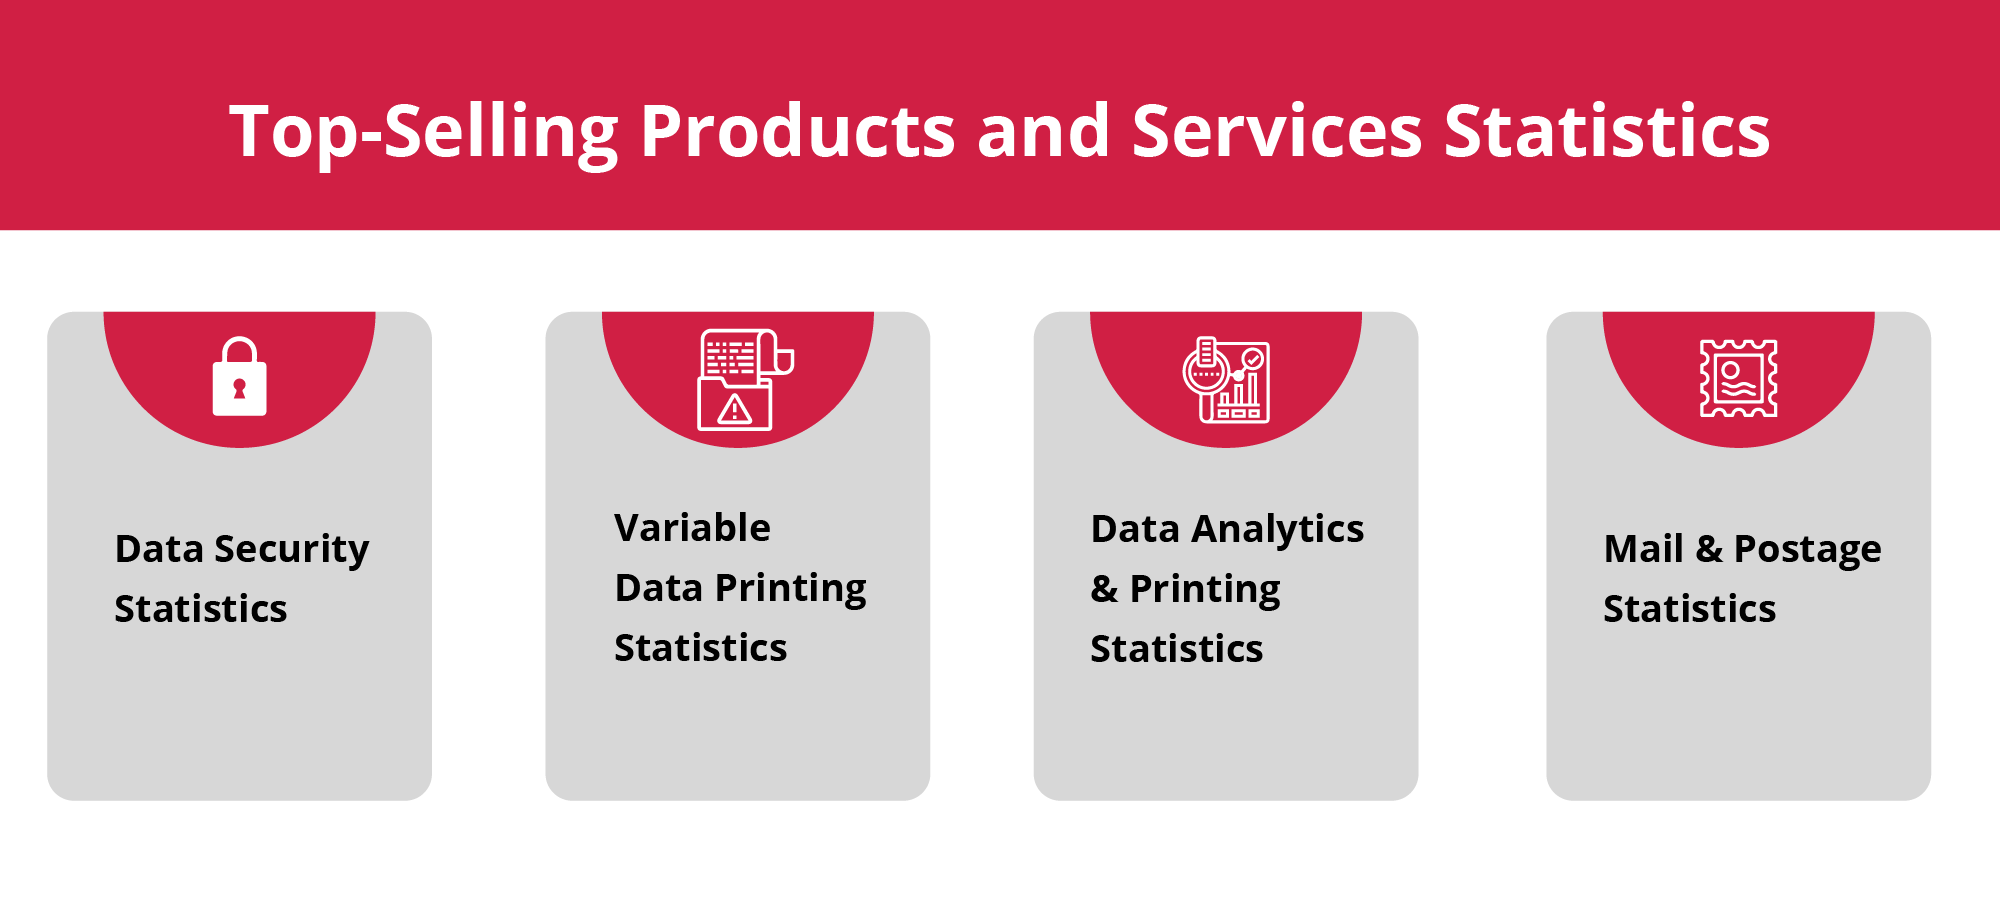 Pointers - Data Security | Variable Data Printing | Data Analytics & Printing | Mail & Postage